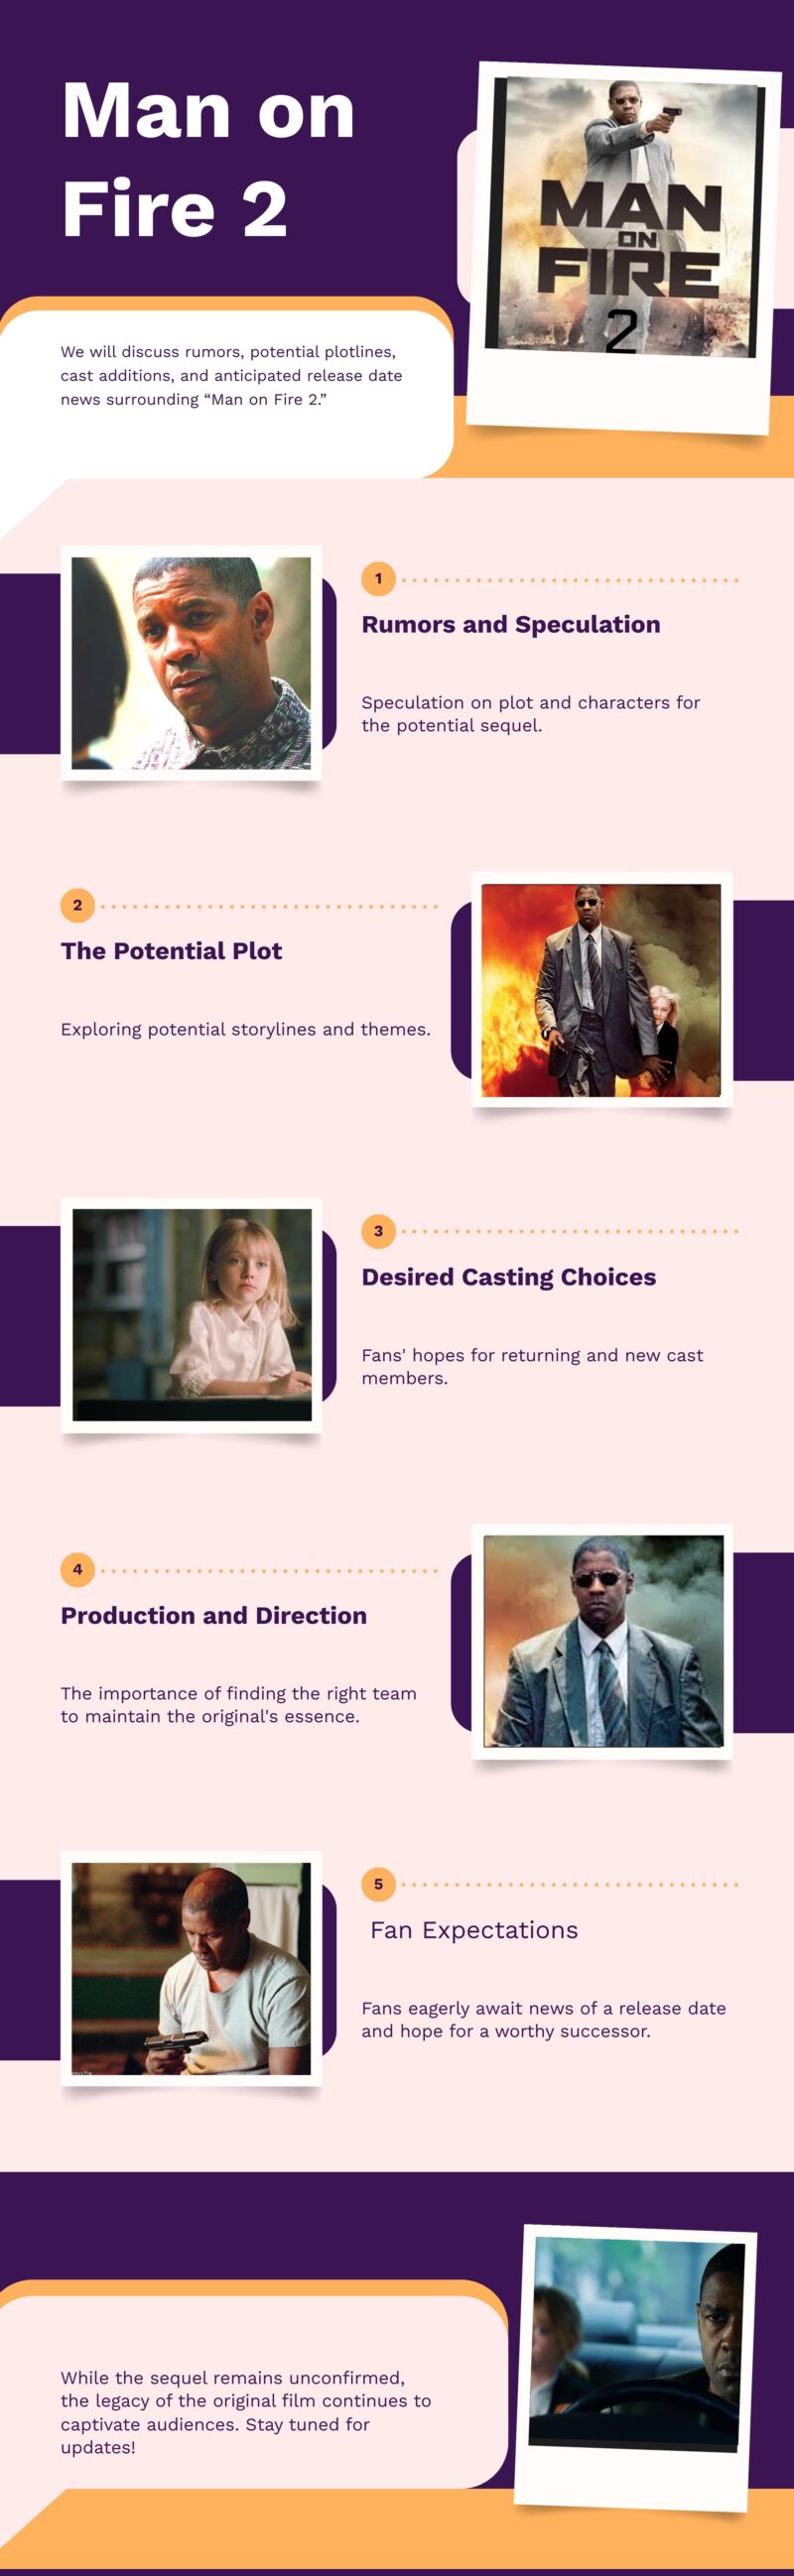 Man on Fire 2 infographic